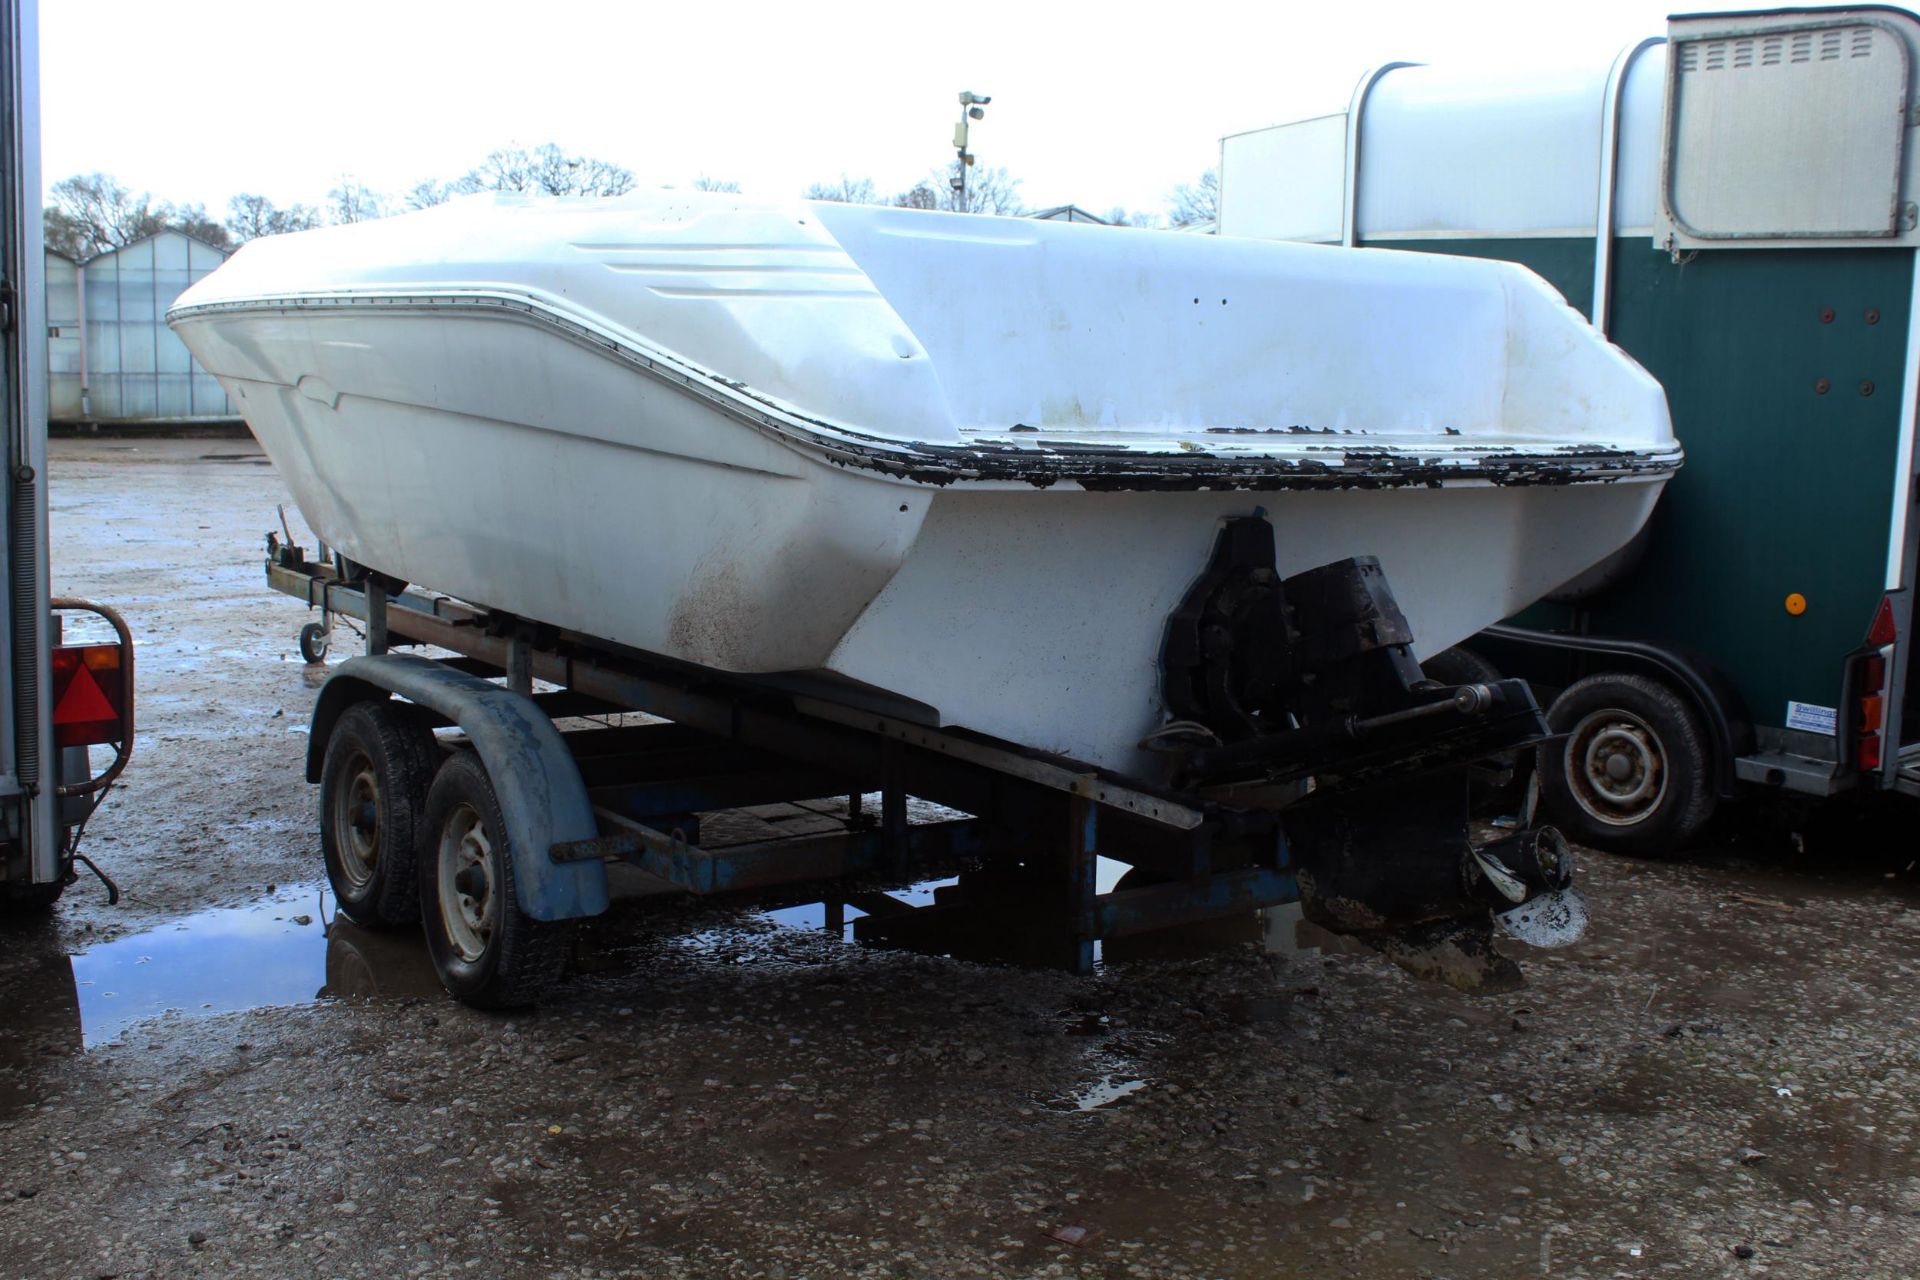 1991 SEARAY 220 WITH MERCRUISER V8/5.7 BRAVO DRIVE WITH SPEED BOAT/TRAILER NO VAT - Image 2 of 5